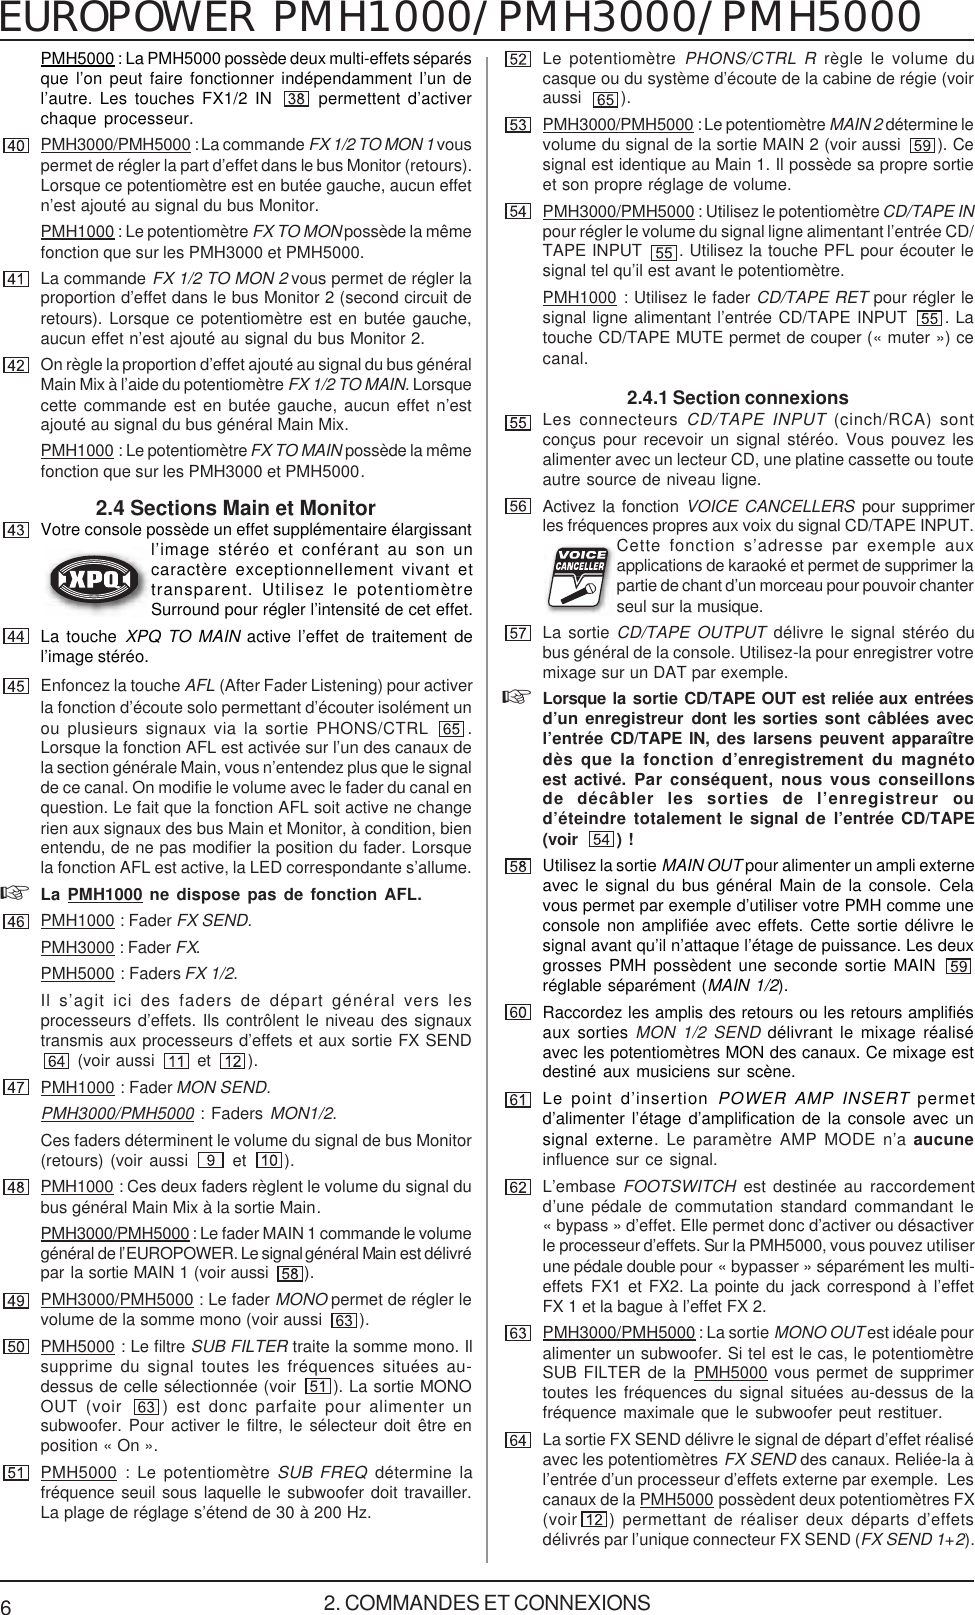 Page 6 of 12 - Behringer PMH1000 User Manual (French) P0115 M FR